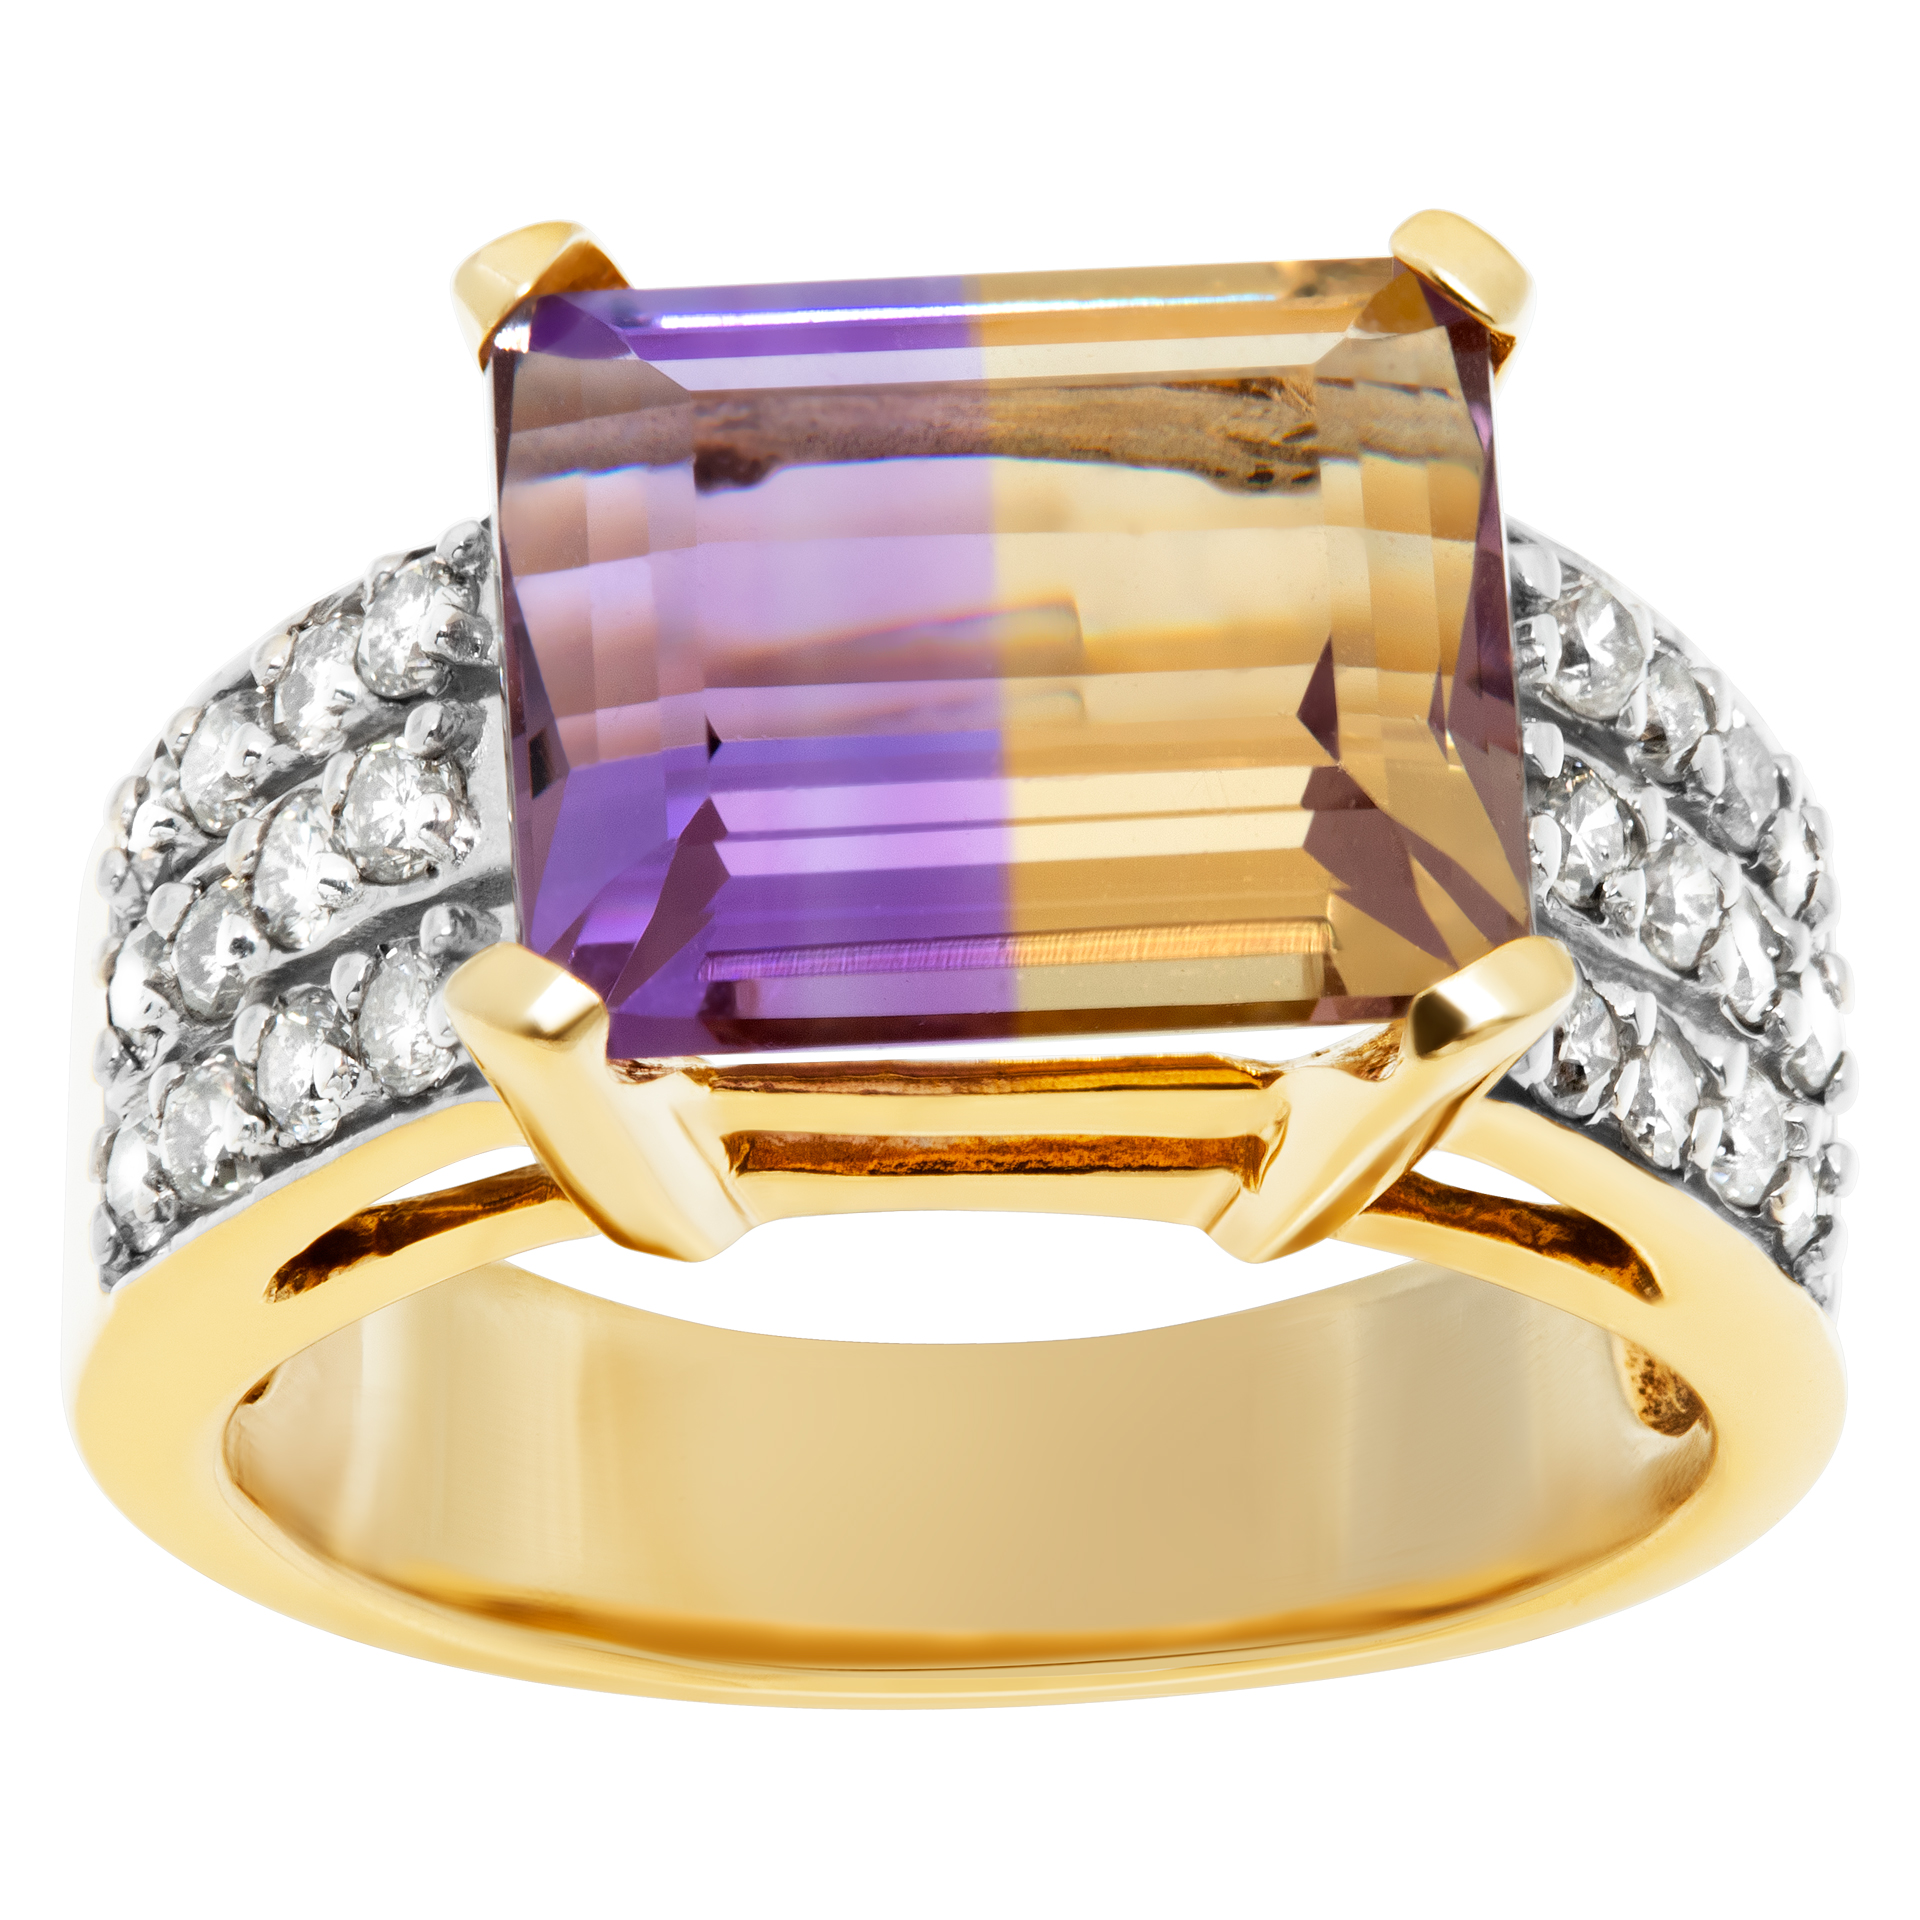 Ametrine ring in 14k yellow gold with approximately 0.85 cts in diamonds